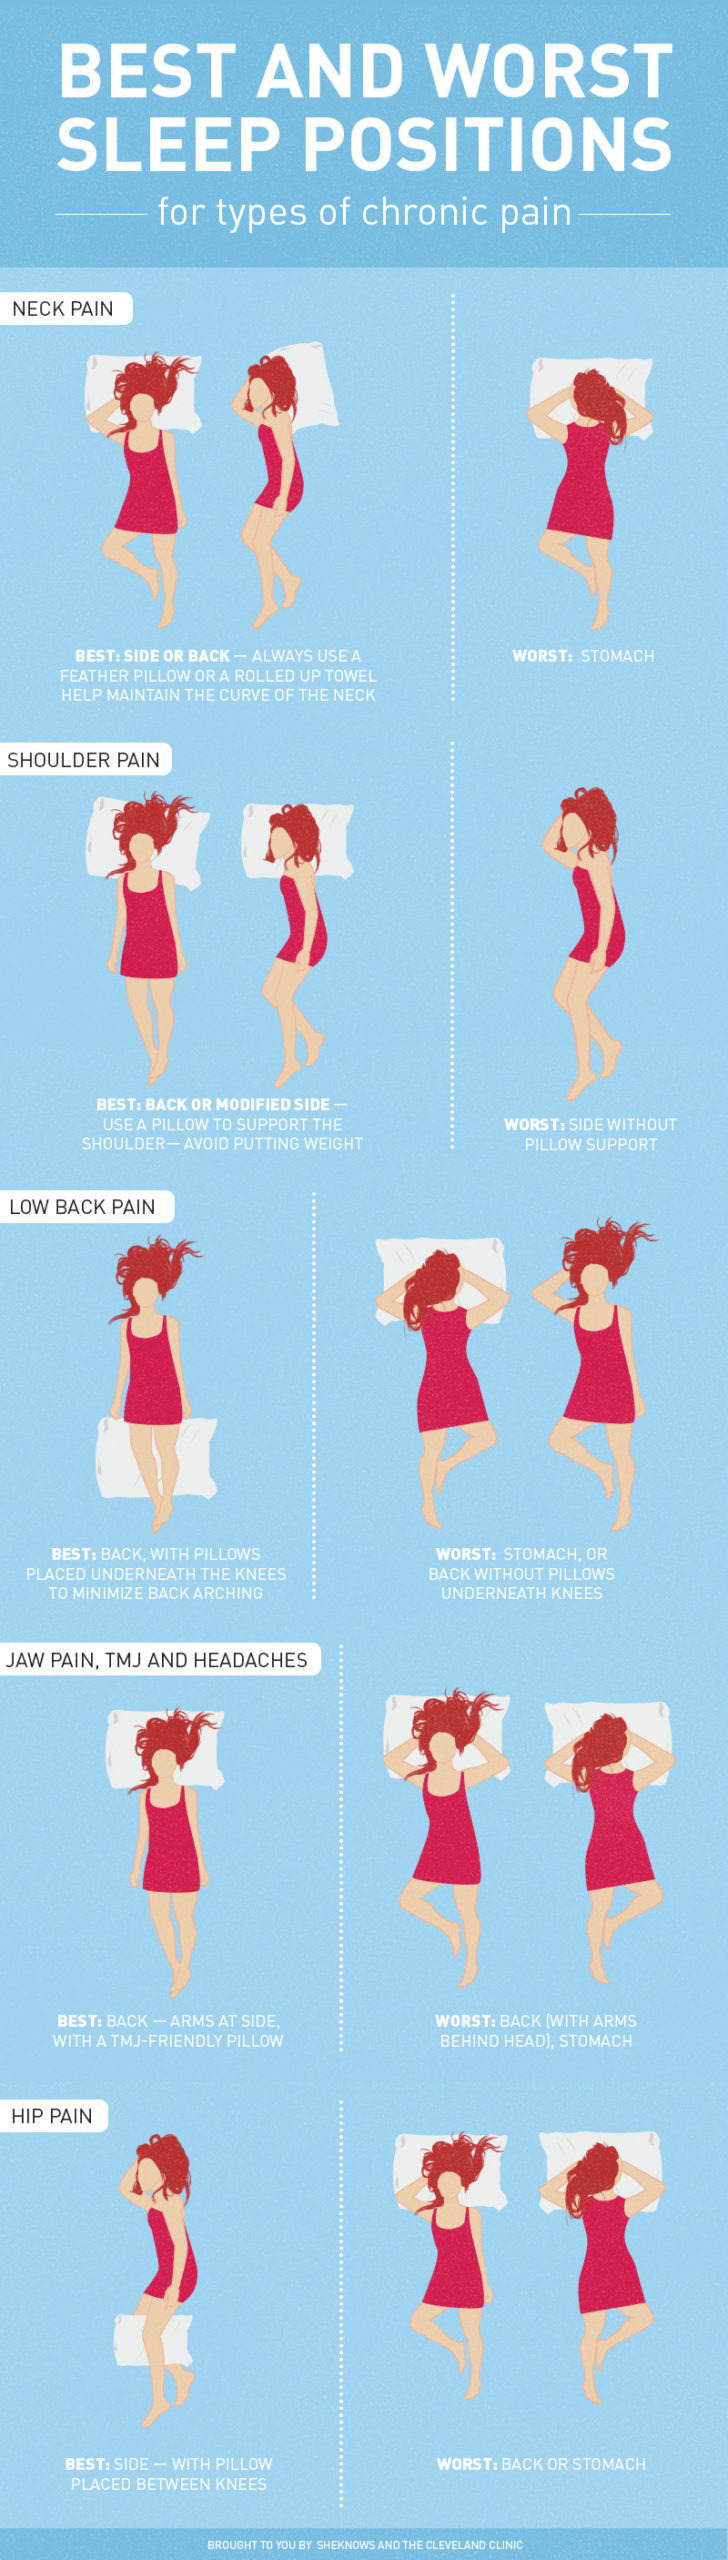 This Infographic Shows The Best And Worst Sleeping Positions For Common Pains